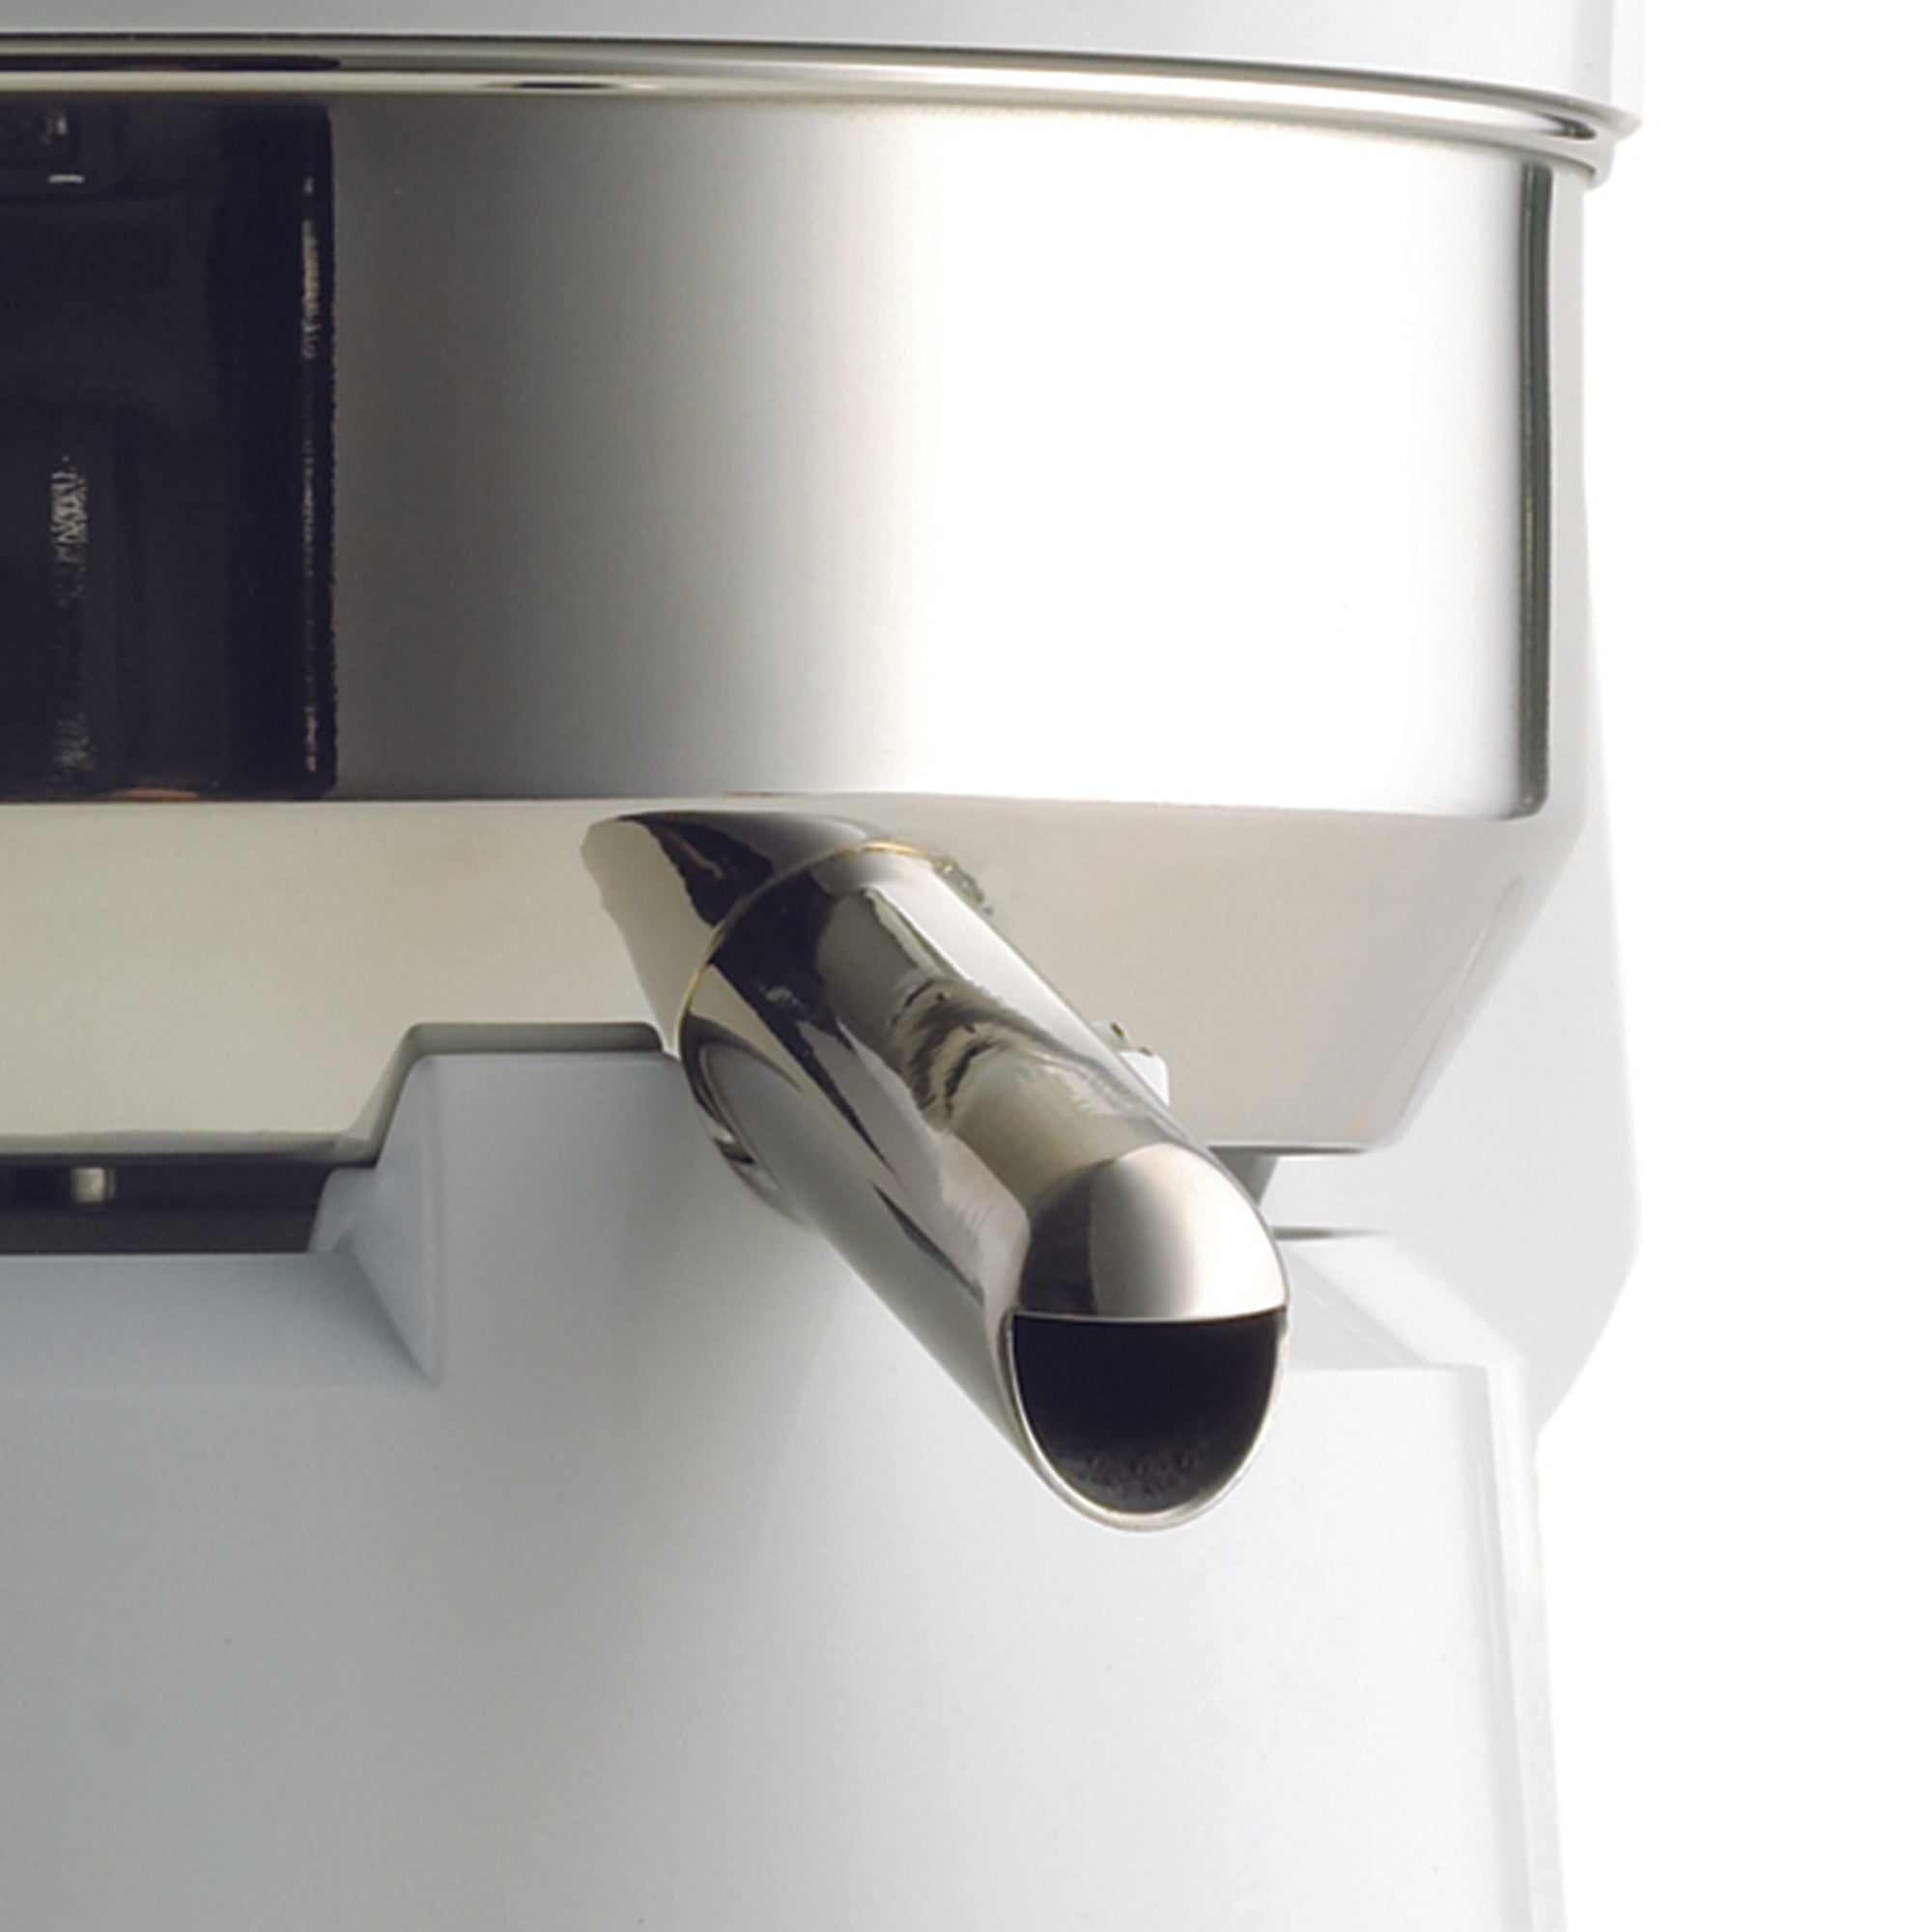 J4000 High-Speed Pulp Ejection Juicer